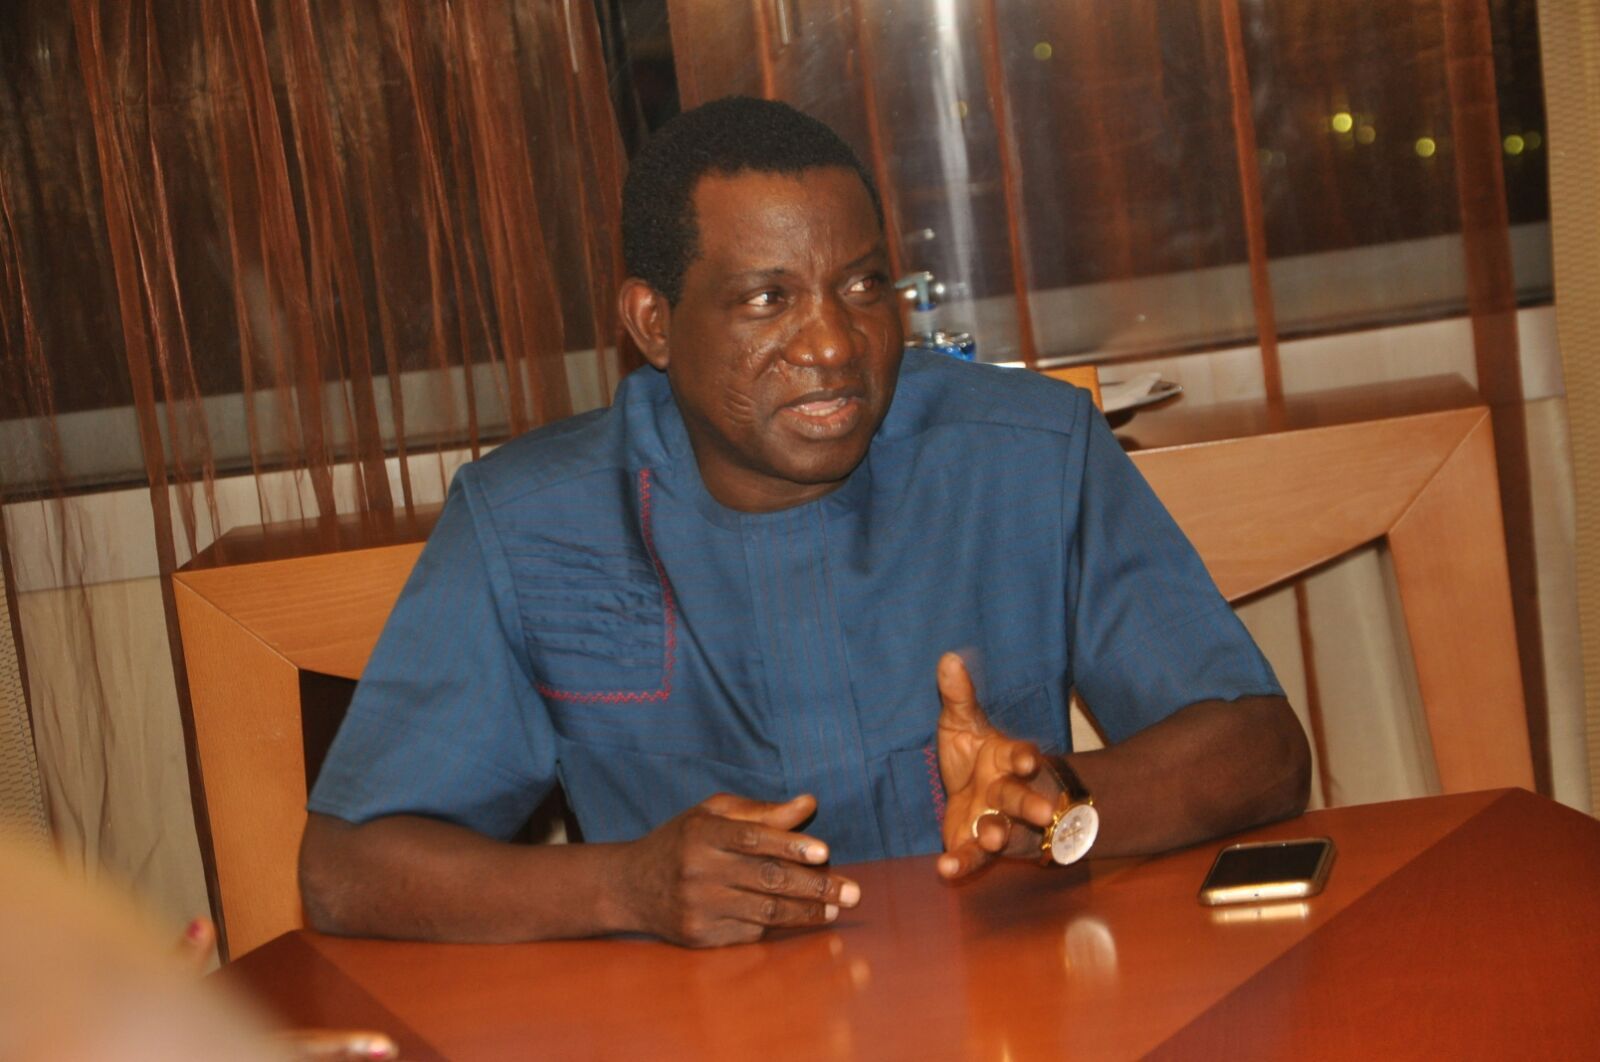 Nigeria news : Plateau State lost N75 billion to looters – Gov. Lalong